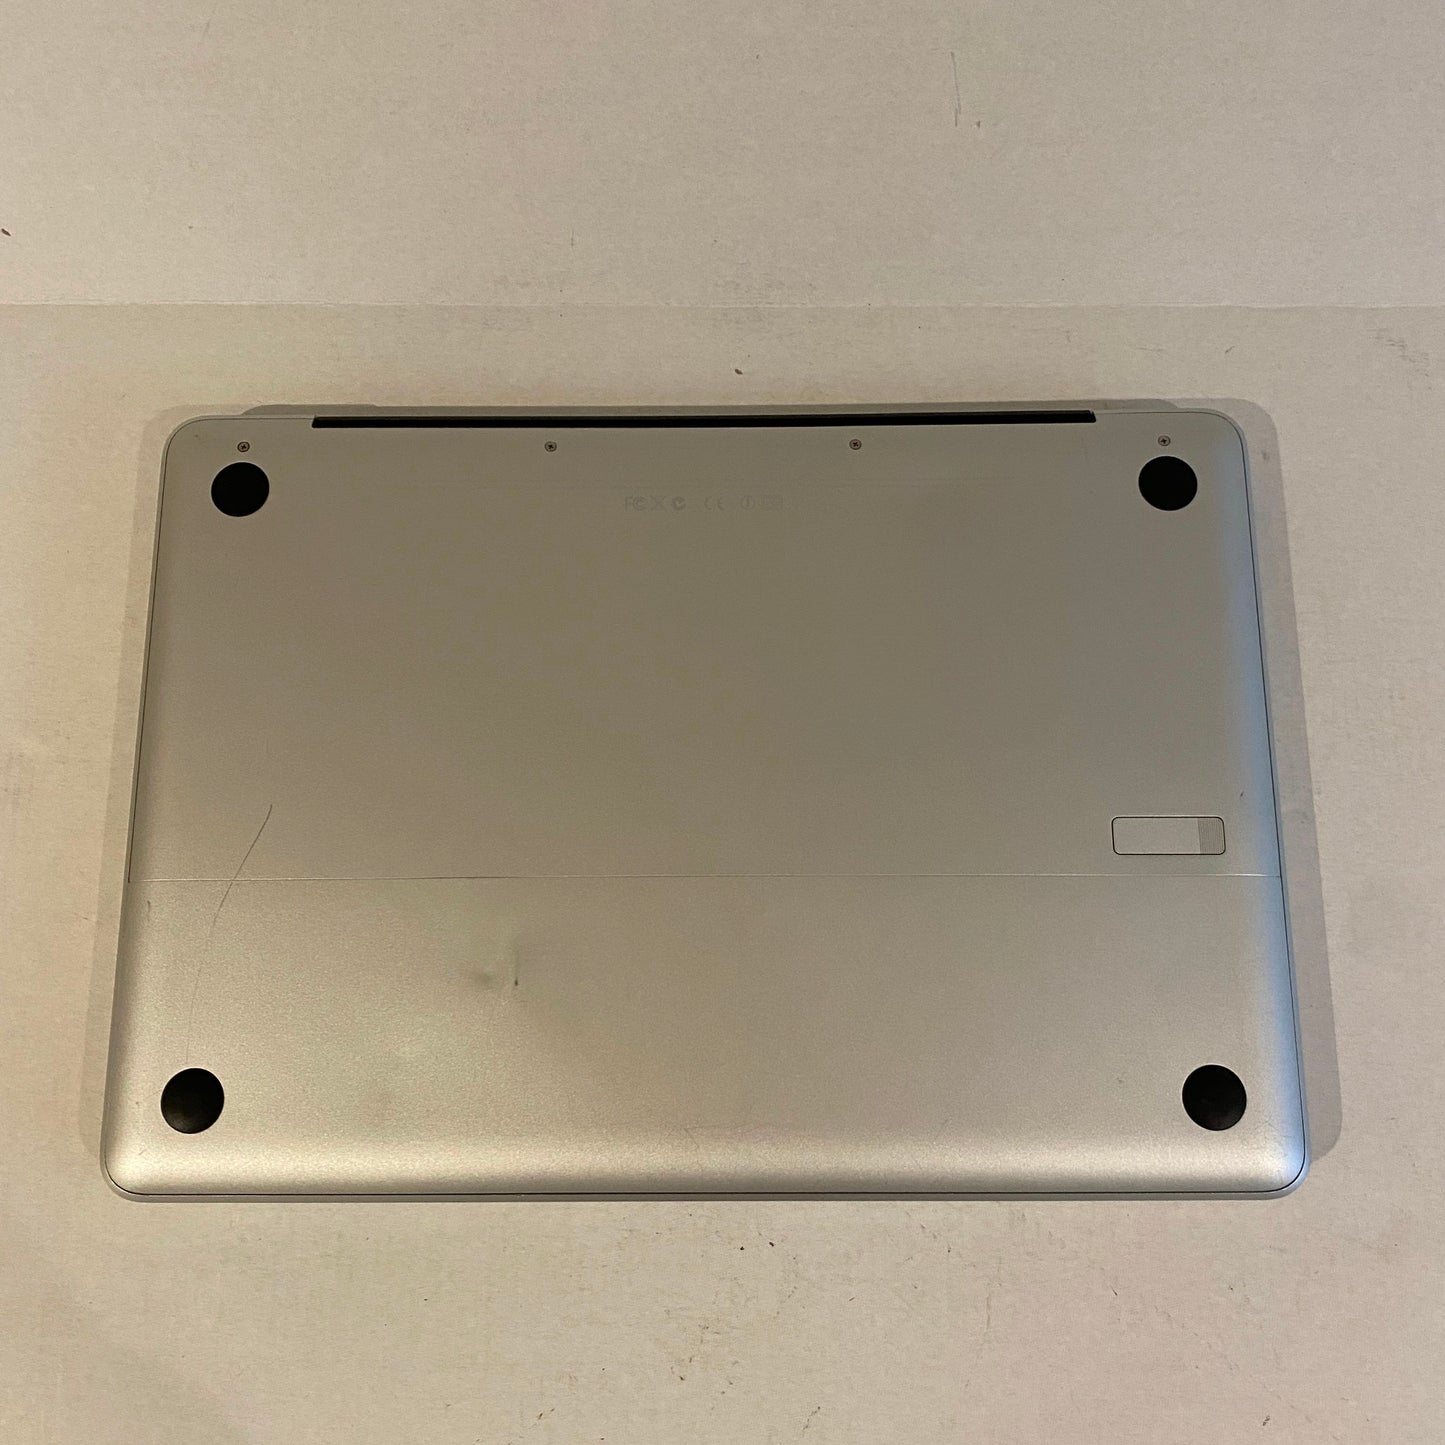 For Parts - Late 2008 13" Silver Macbook 2.4 Ghz Core 2 Duo